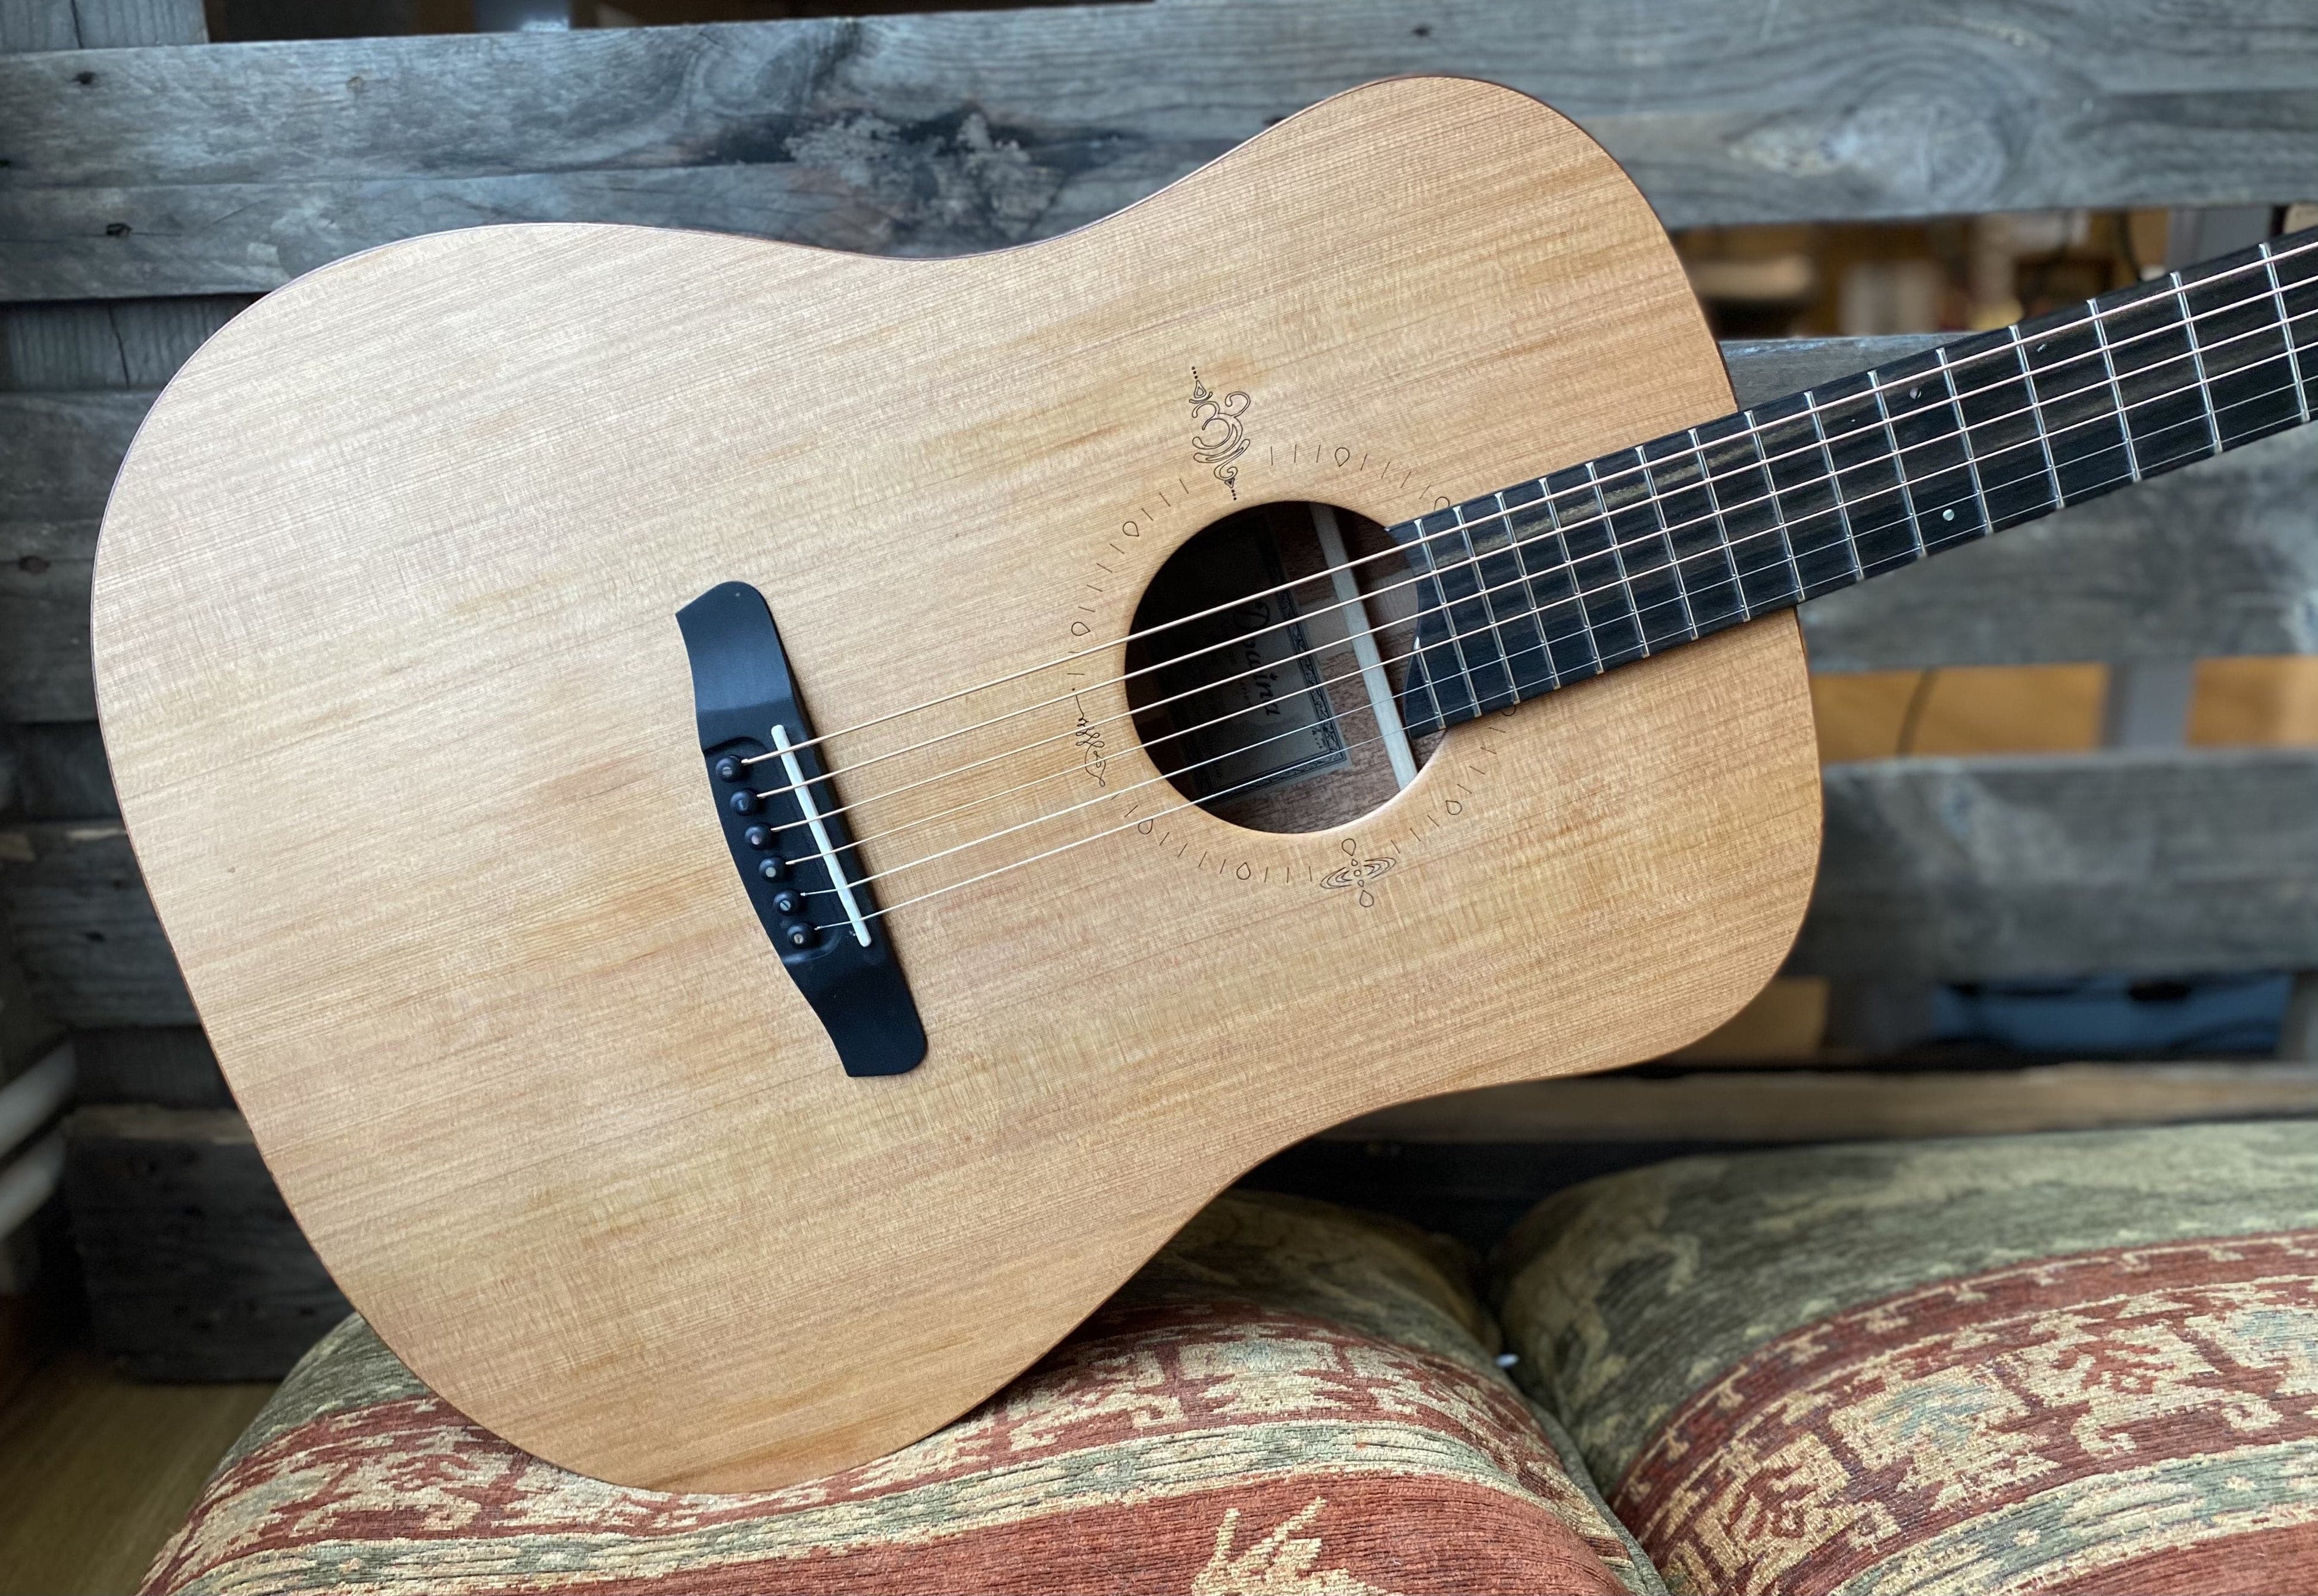 Dowina Pure Dreadnought 100% Handmade Custom Shop Acoustic Guitar From Slovakia, Acoustic Guitar for sale at Richards Guitars.